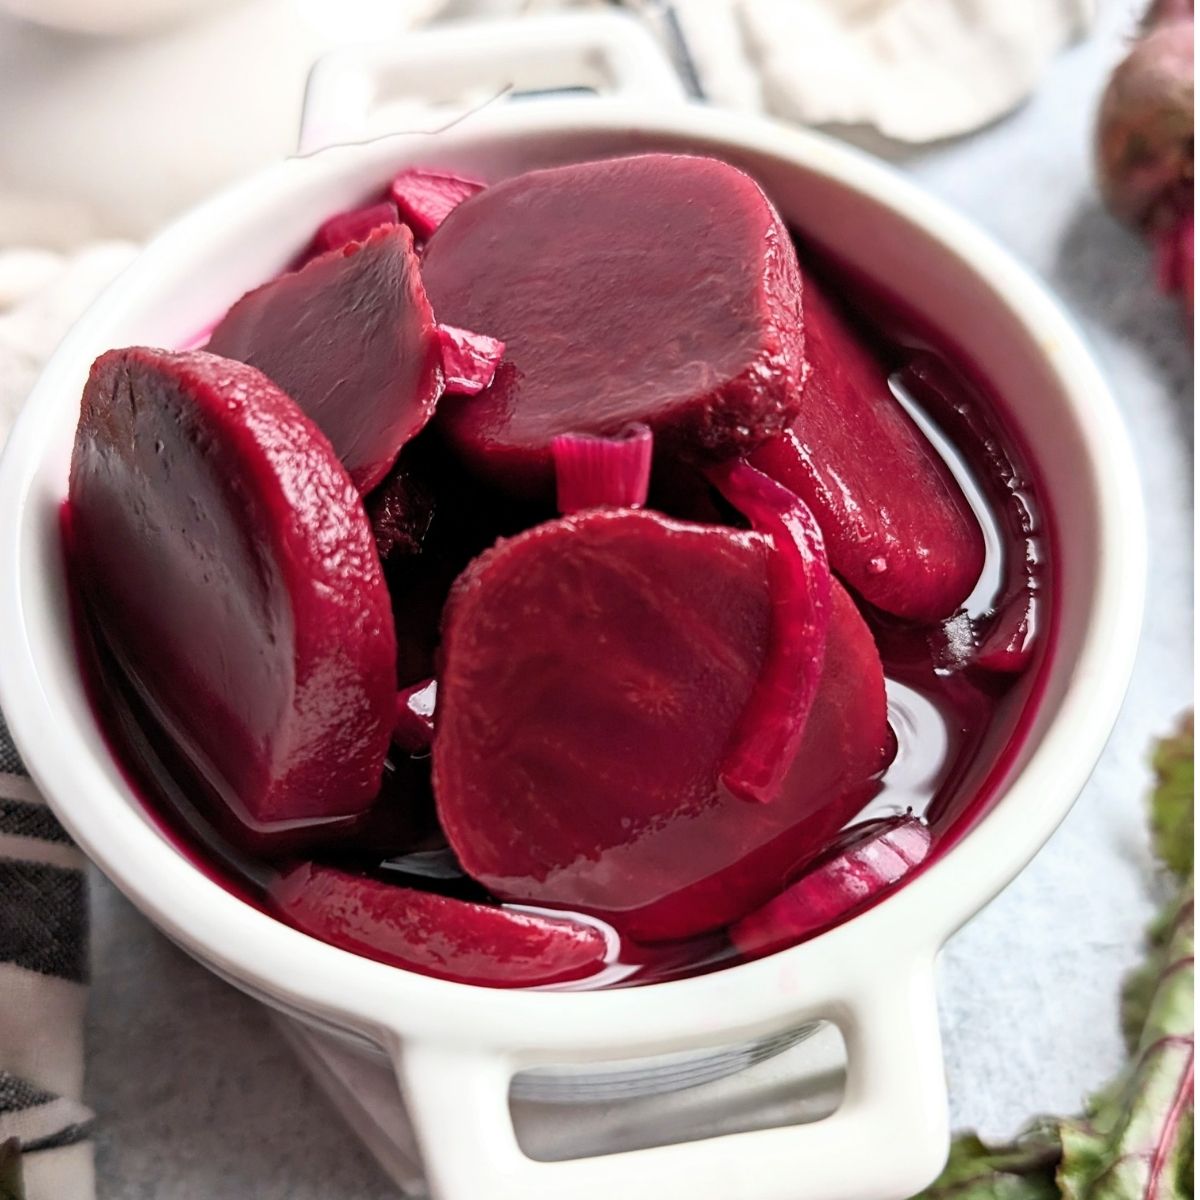 unsalted pickled beets recipe easy no salt added pickles with beets and vinegar and onions